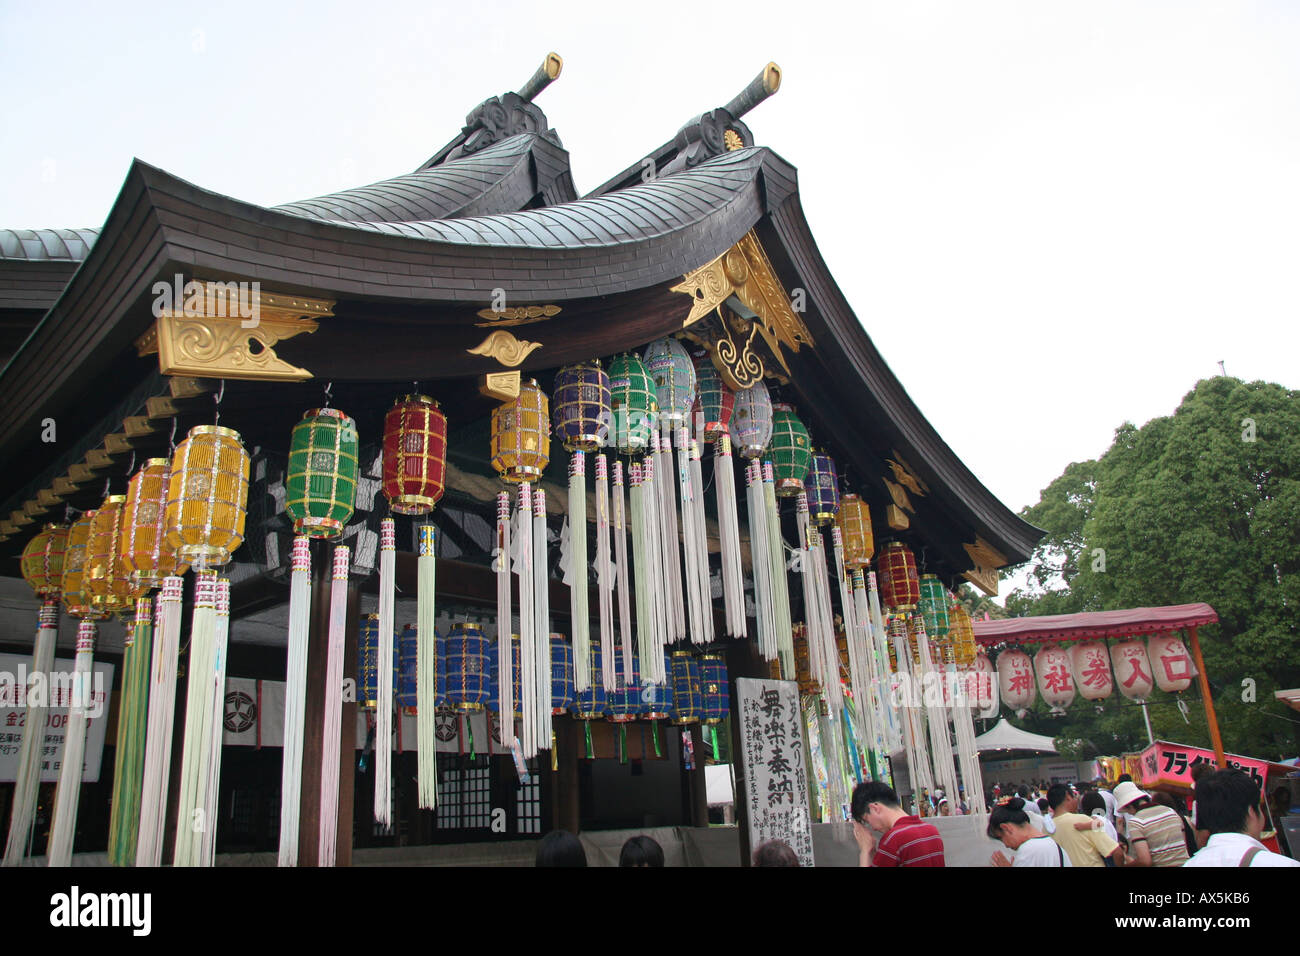 Shrine decorated with lanterns for the summer tanabata festival in Japan Stock Photo